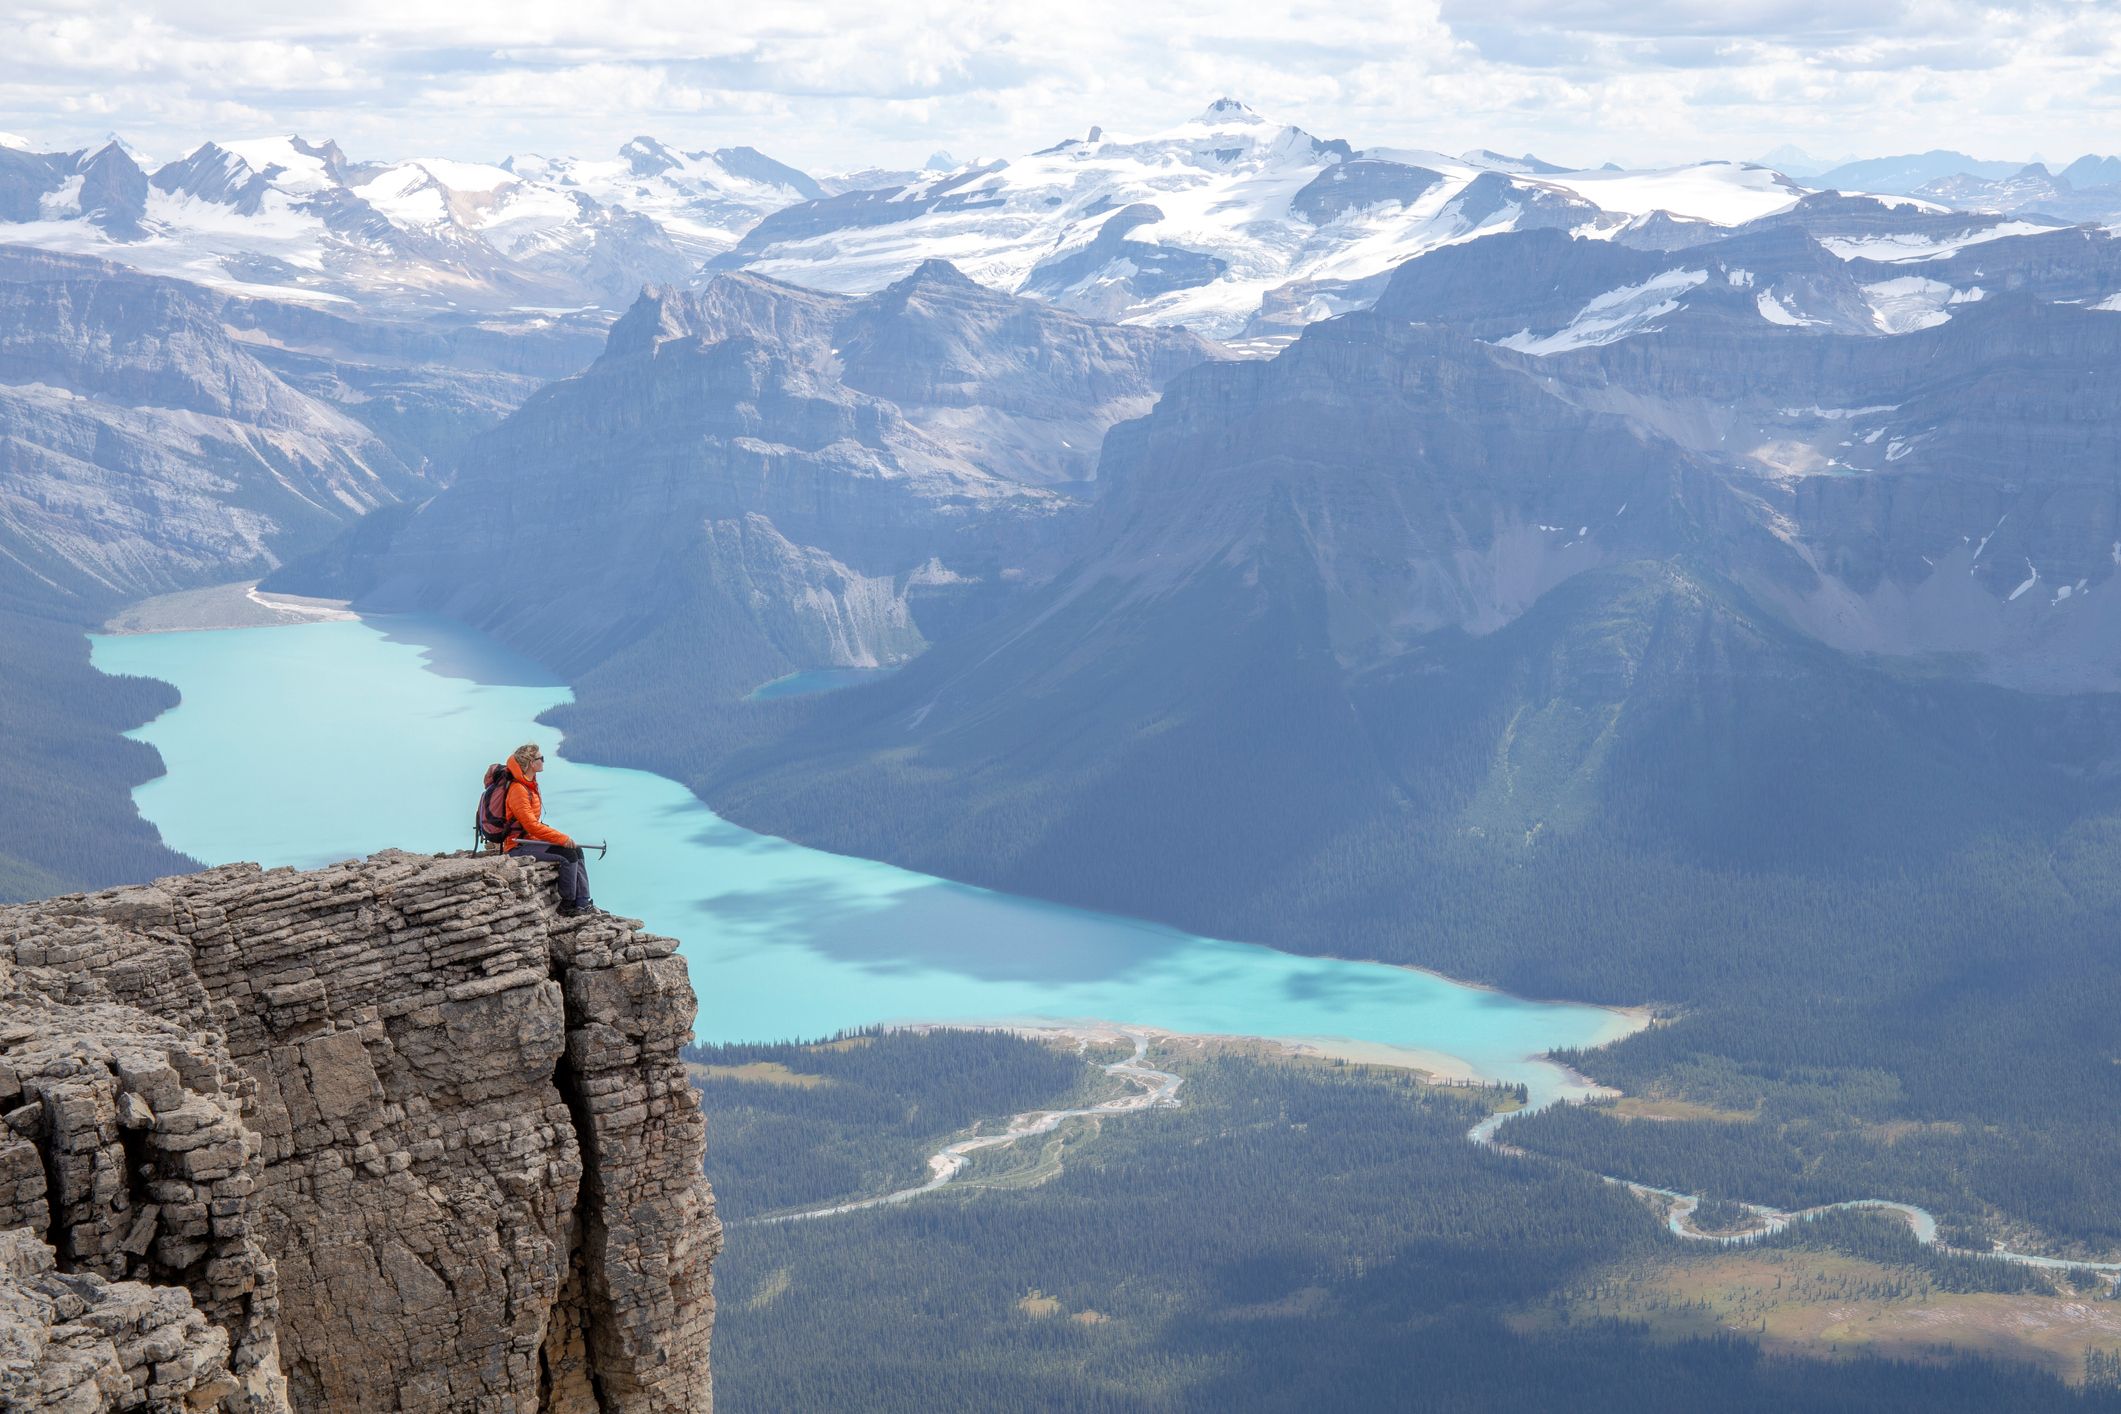 A mountaineer admiring the scenic view of nature; Getty Images